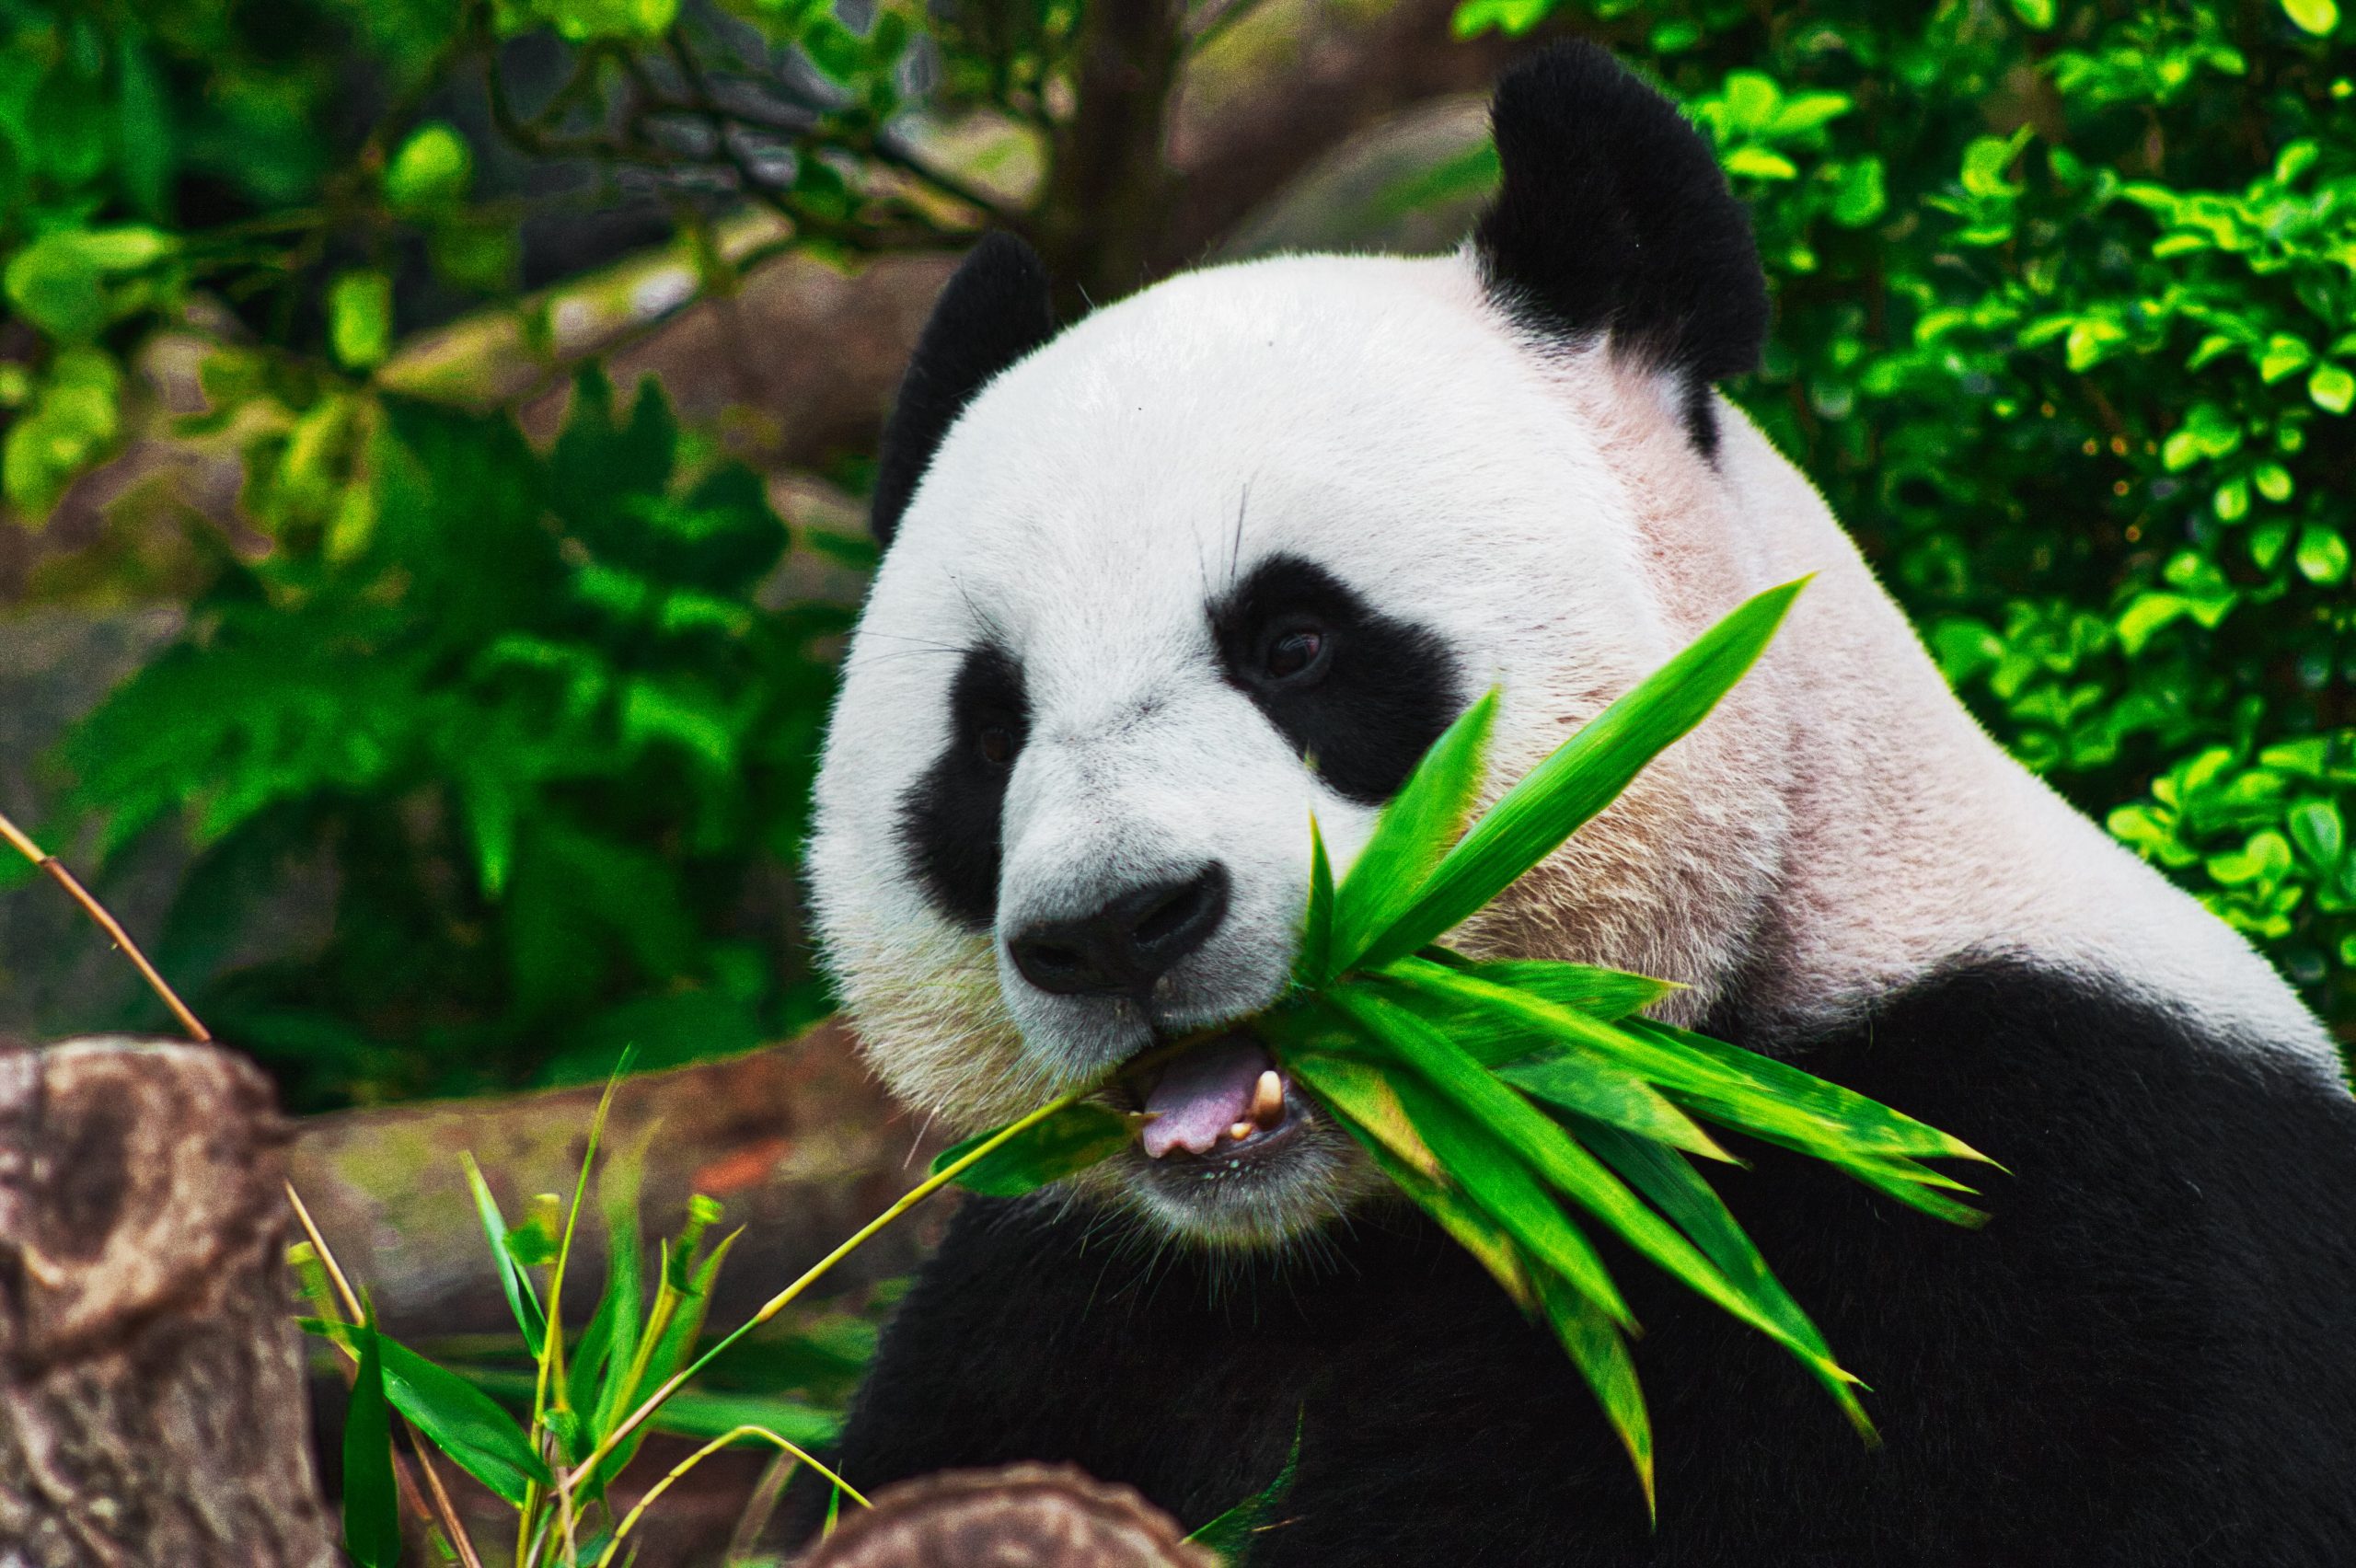 The beloved animal panda is the national animal of which nation?